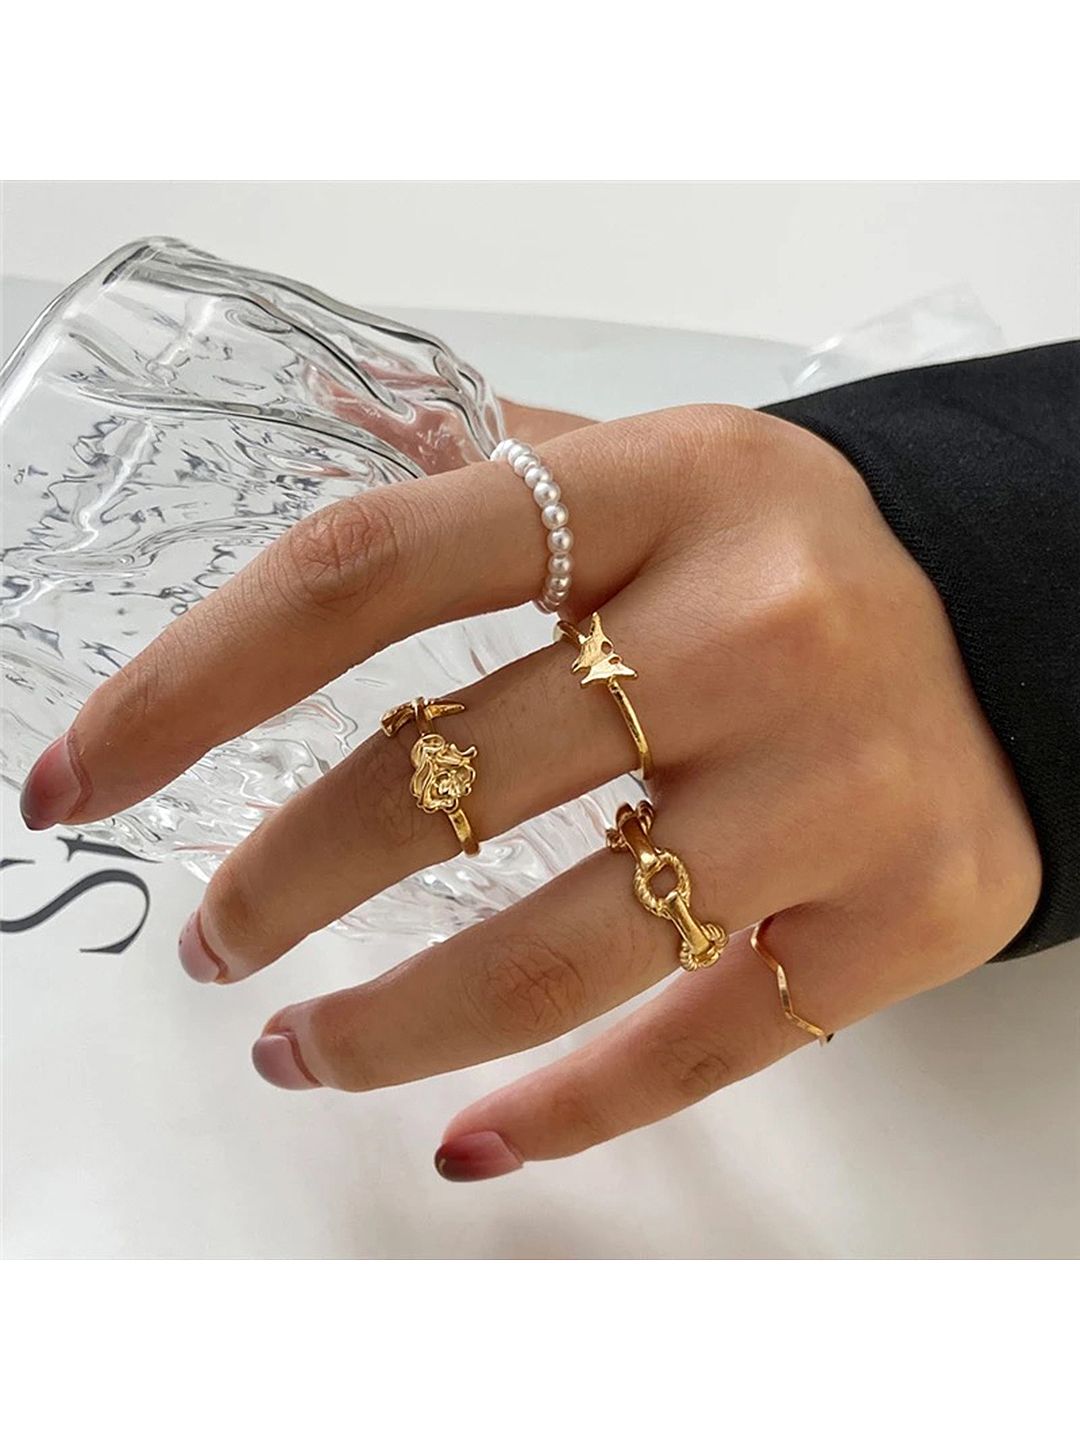 Vembley Set Of 5 Gold-Plated Finger Rings Price in India